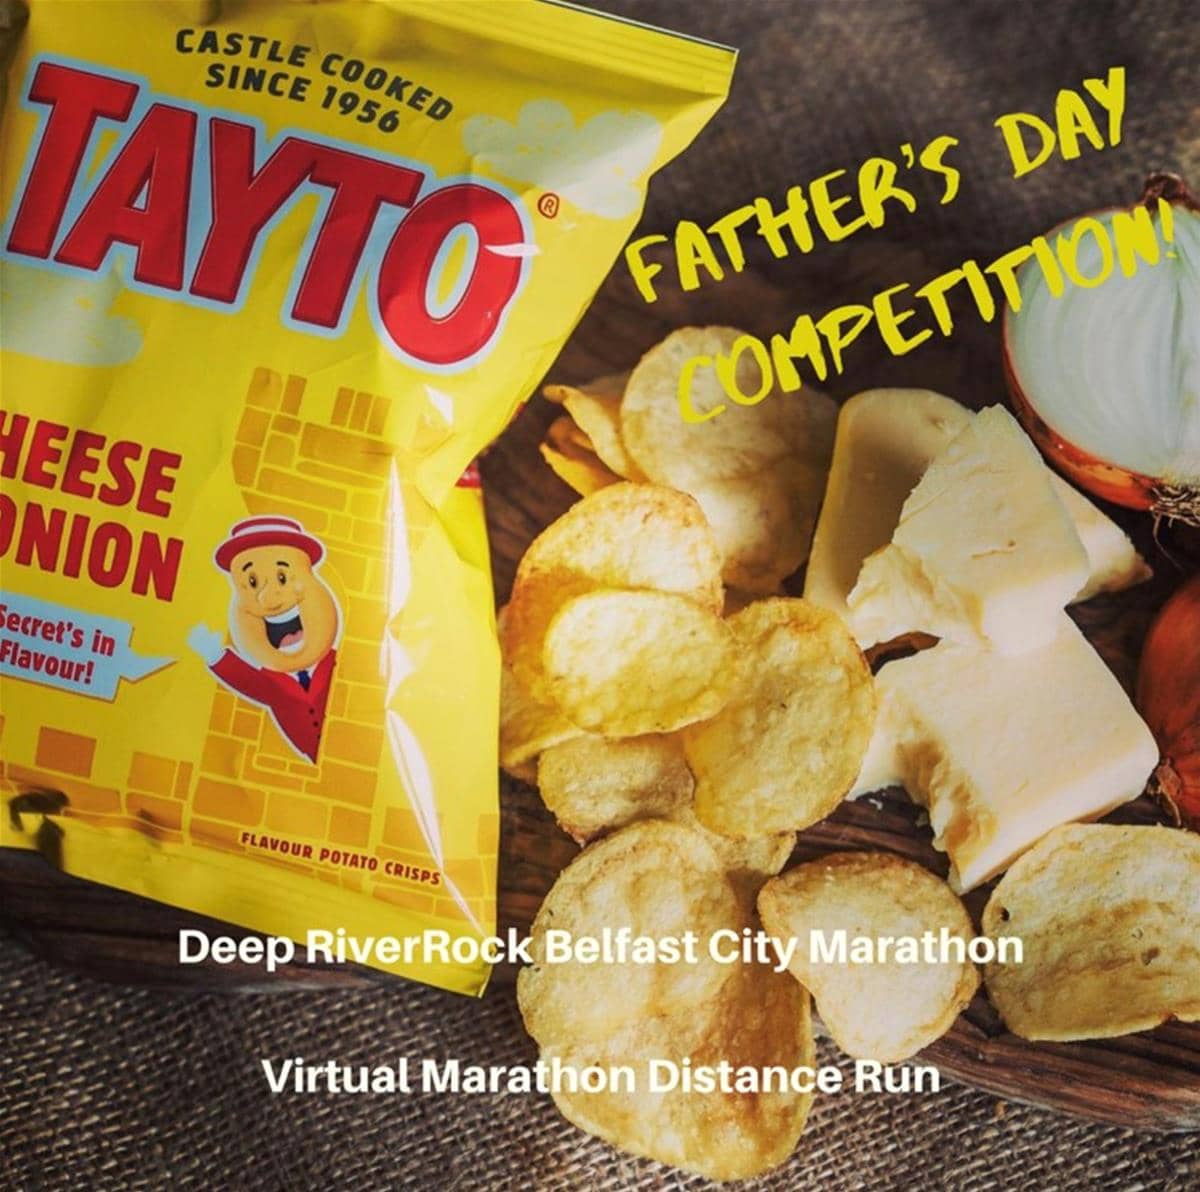 Tayto Fathers Day Competition 2020